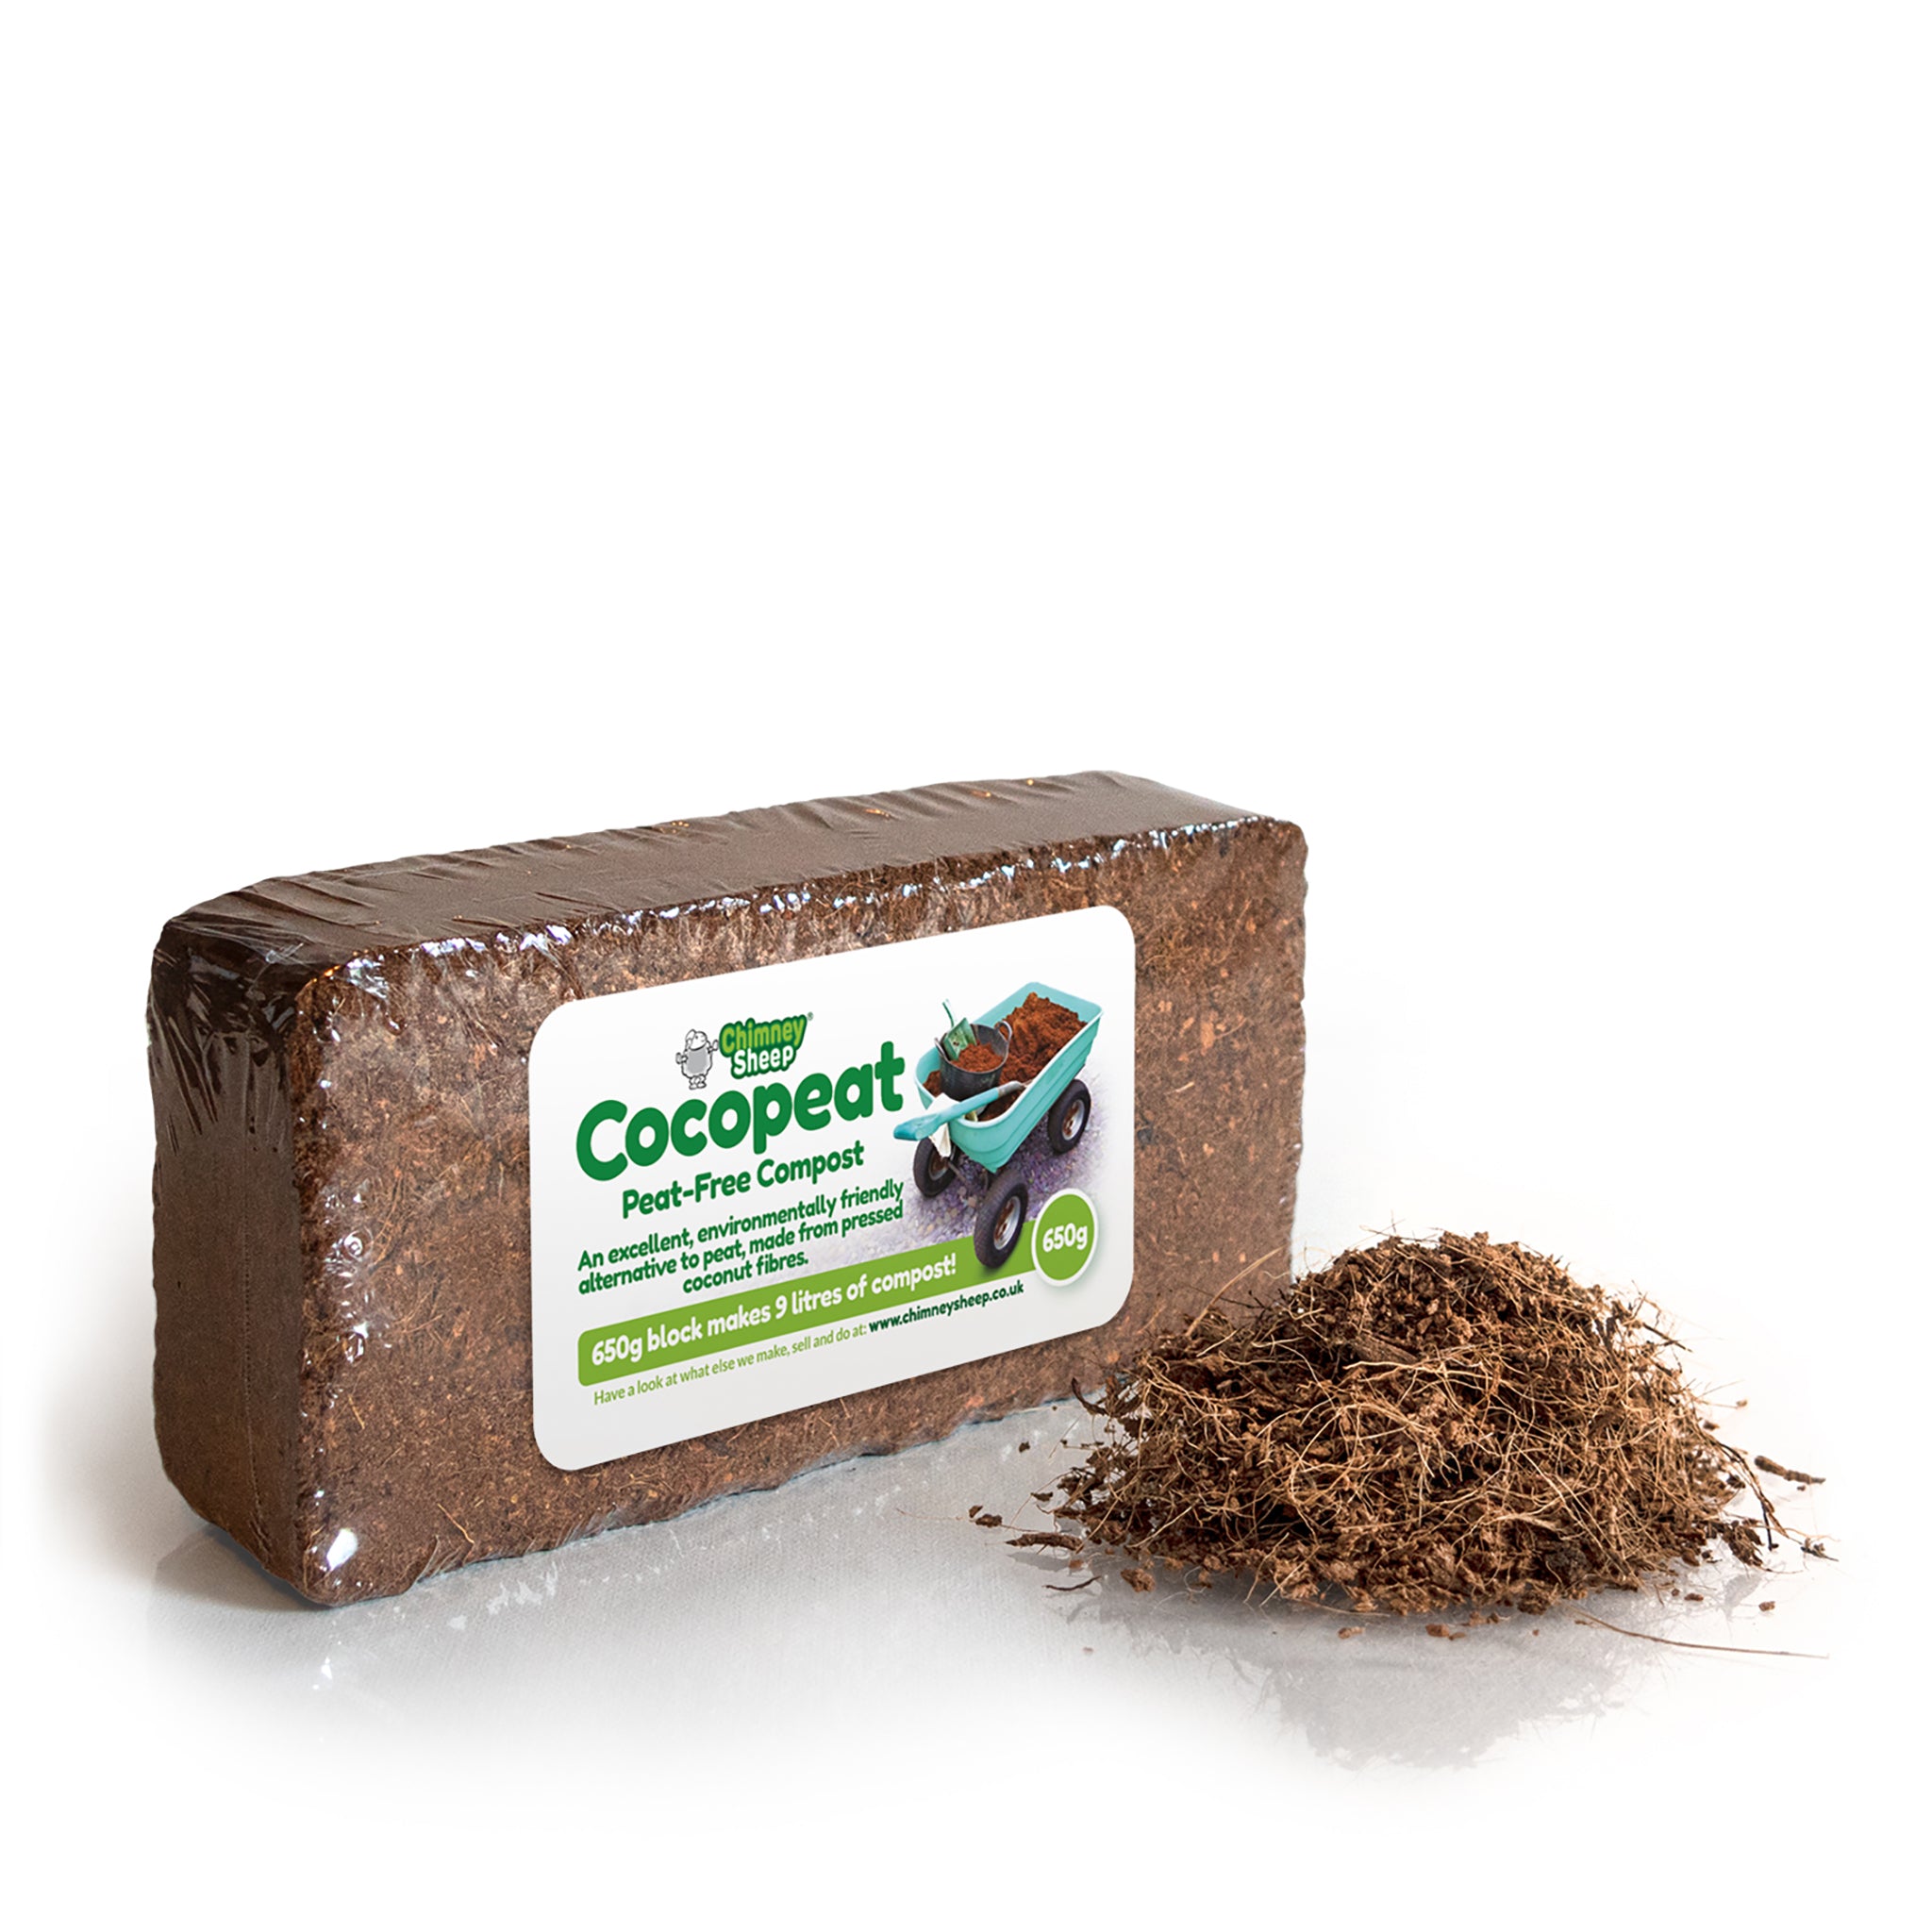 small block of compressed cocopeat that grows to 9 litres of peat free compost